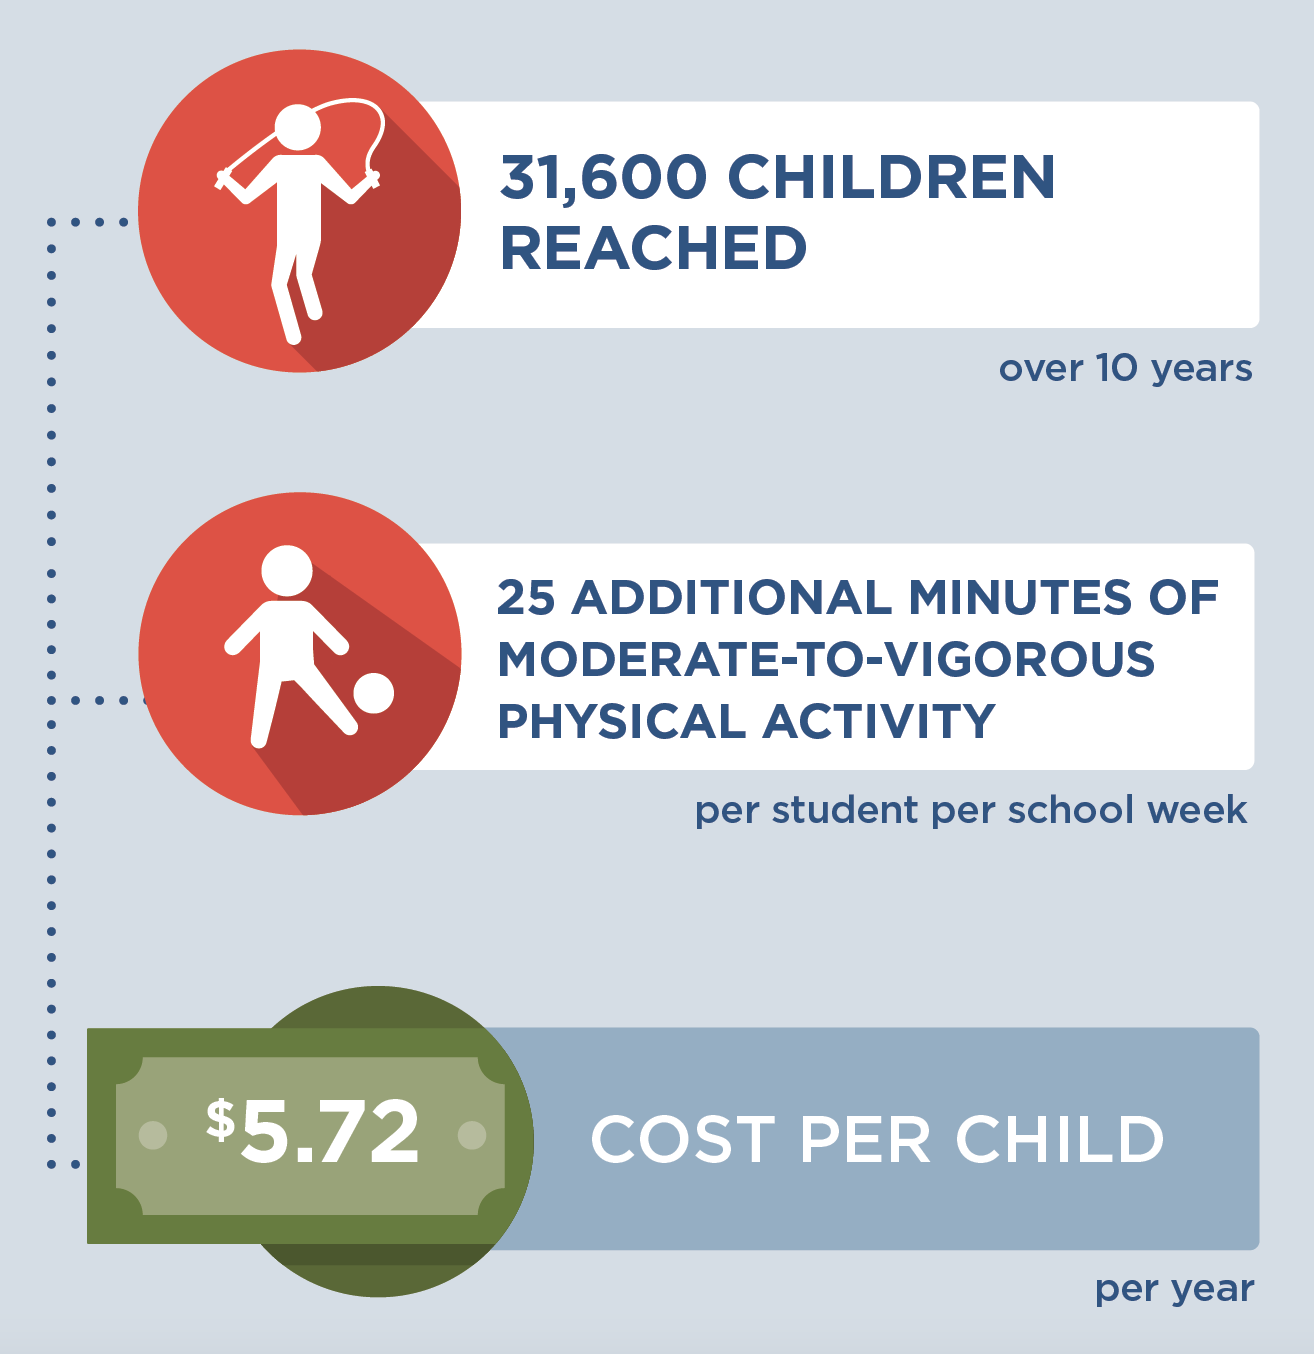 If movement breaks in the classroom was integrated into Massachusetts schools, then by the end of 2029: 31,600 children would be reached over 10 years; per school week, each student would gain 25 additional minutes of moderate-to-vigorous physical activity; and this strategy would cost $5.72 per child per year to implement.